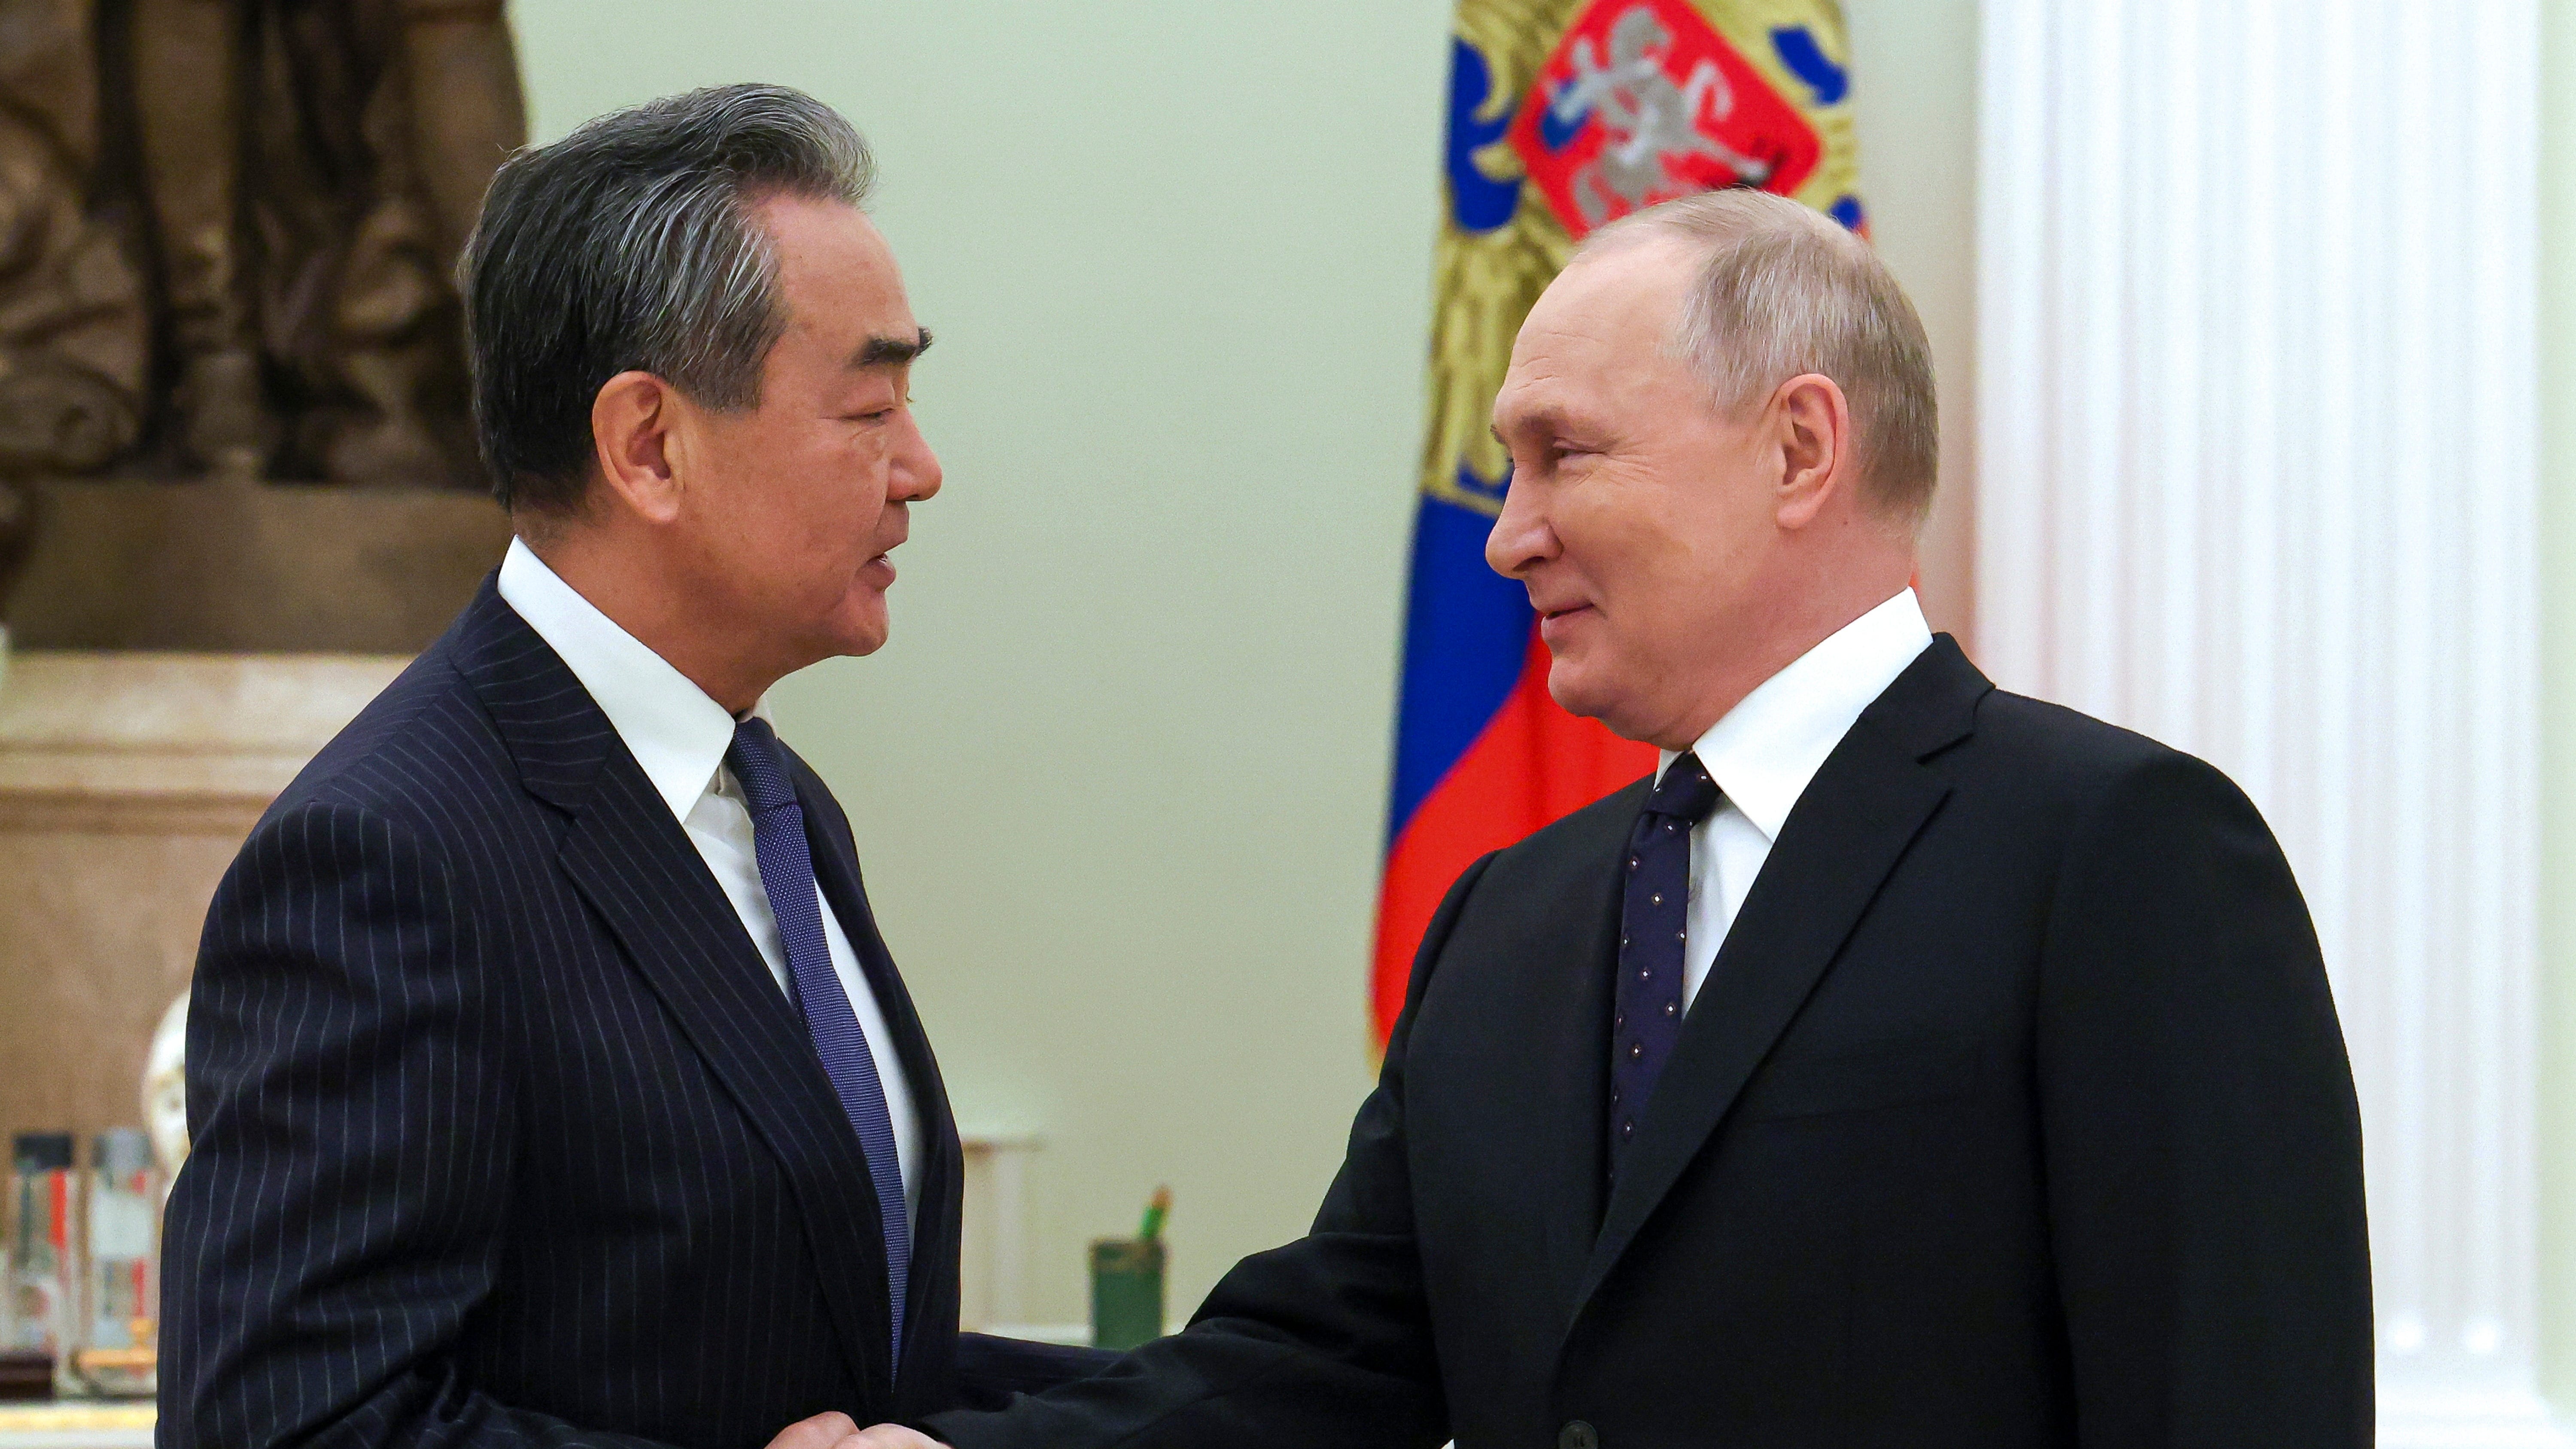 Russian President Vladimir Putin greets Chinese Communist Party's foreign policy chief Wang Yi during their meeting at the Kremlin in Moscow, Russia, Wednesday, Feb. 22, 2023. (Anton Novoderezhkin, Sputnik, Kremlin Pool Photo via AP) ORG XMIT: XAZ117